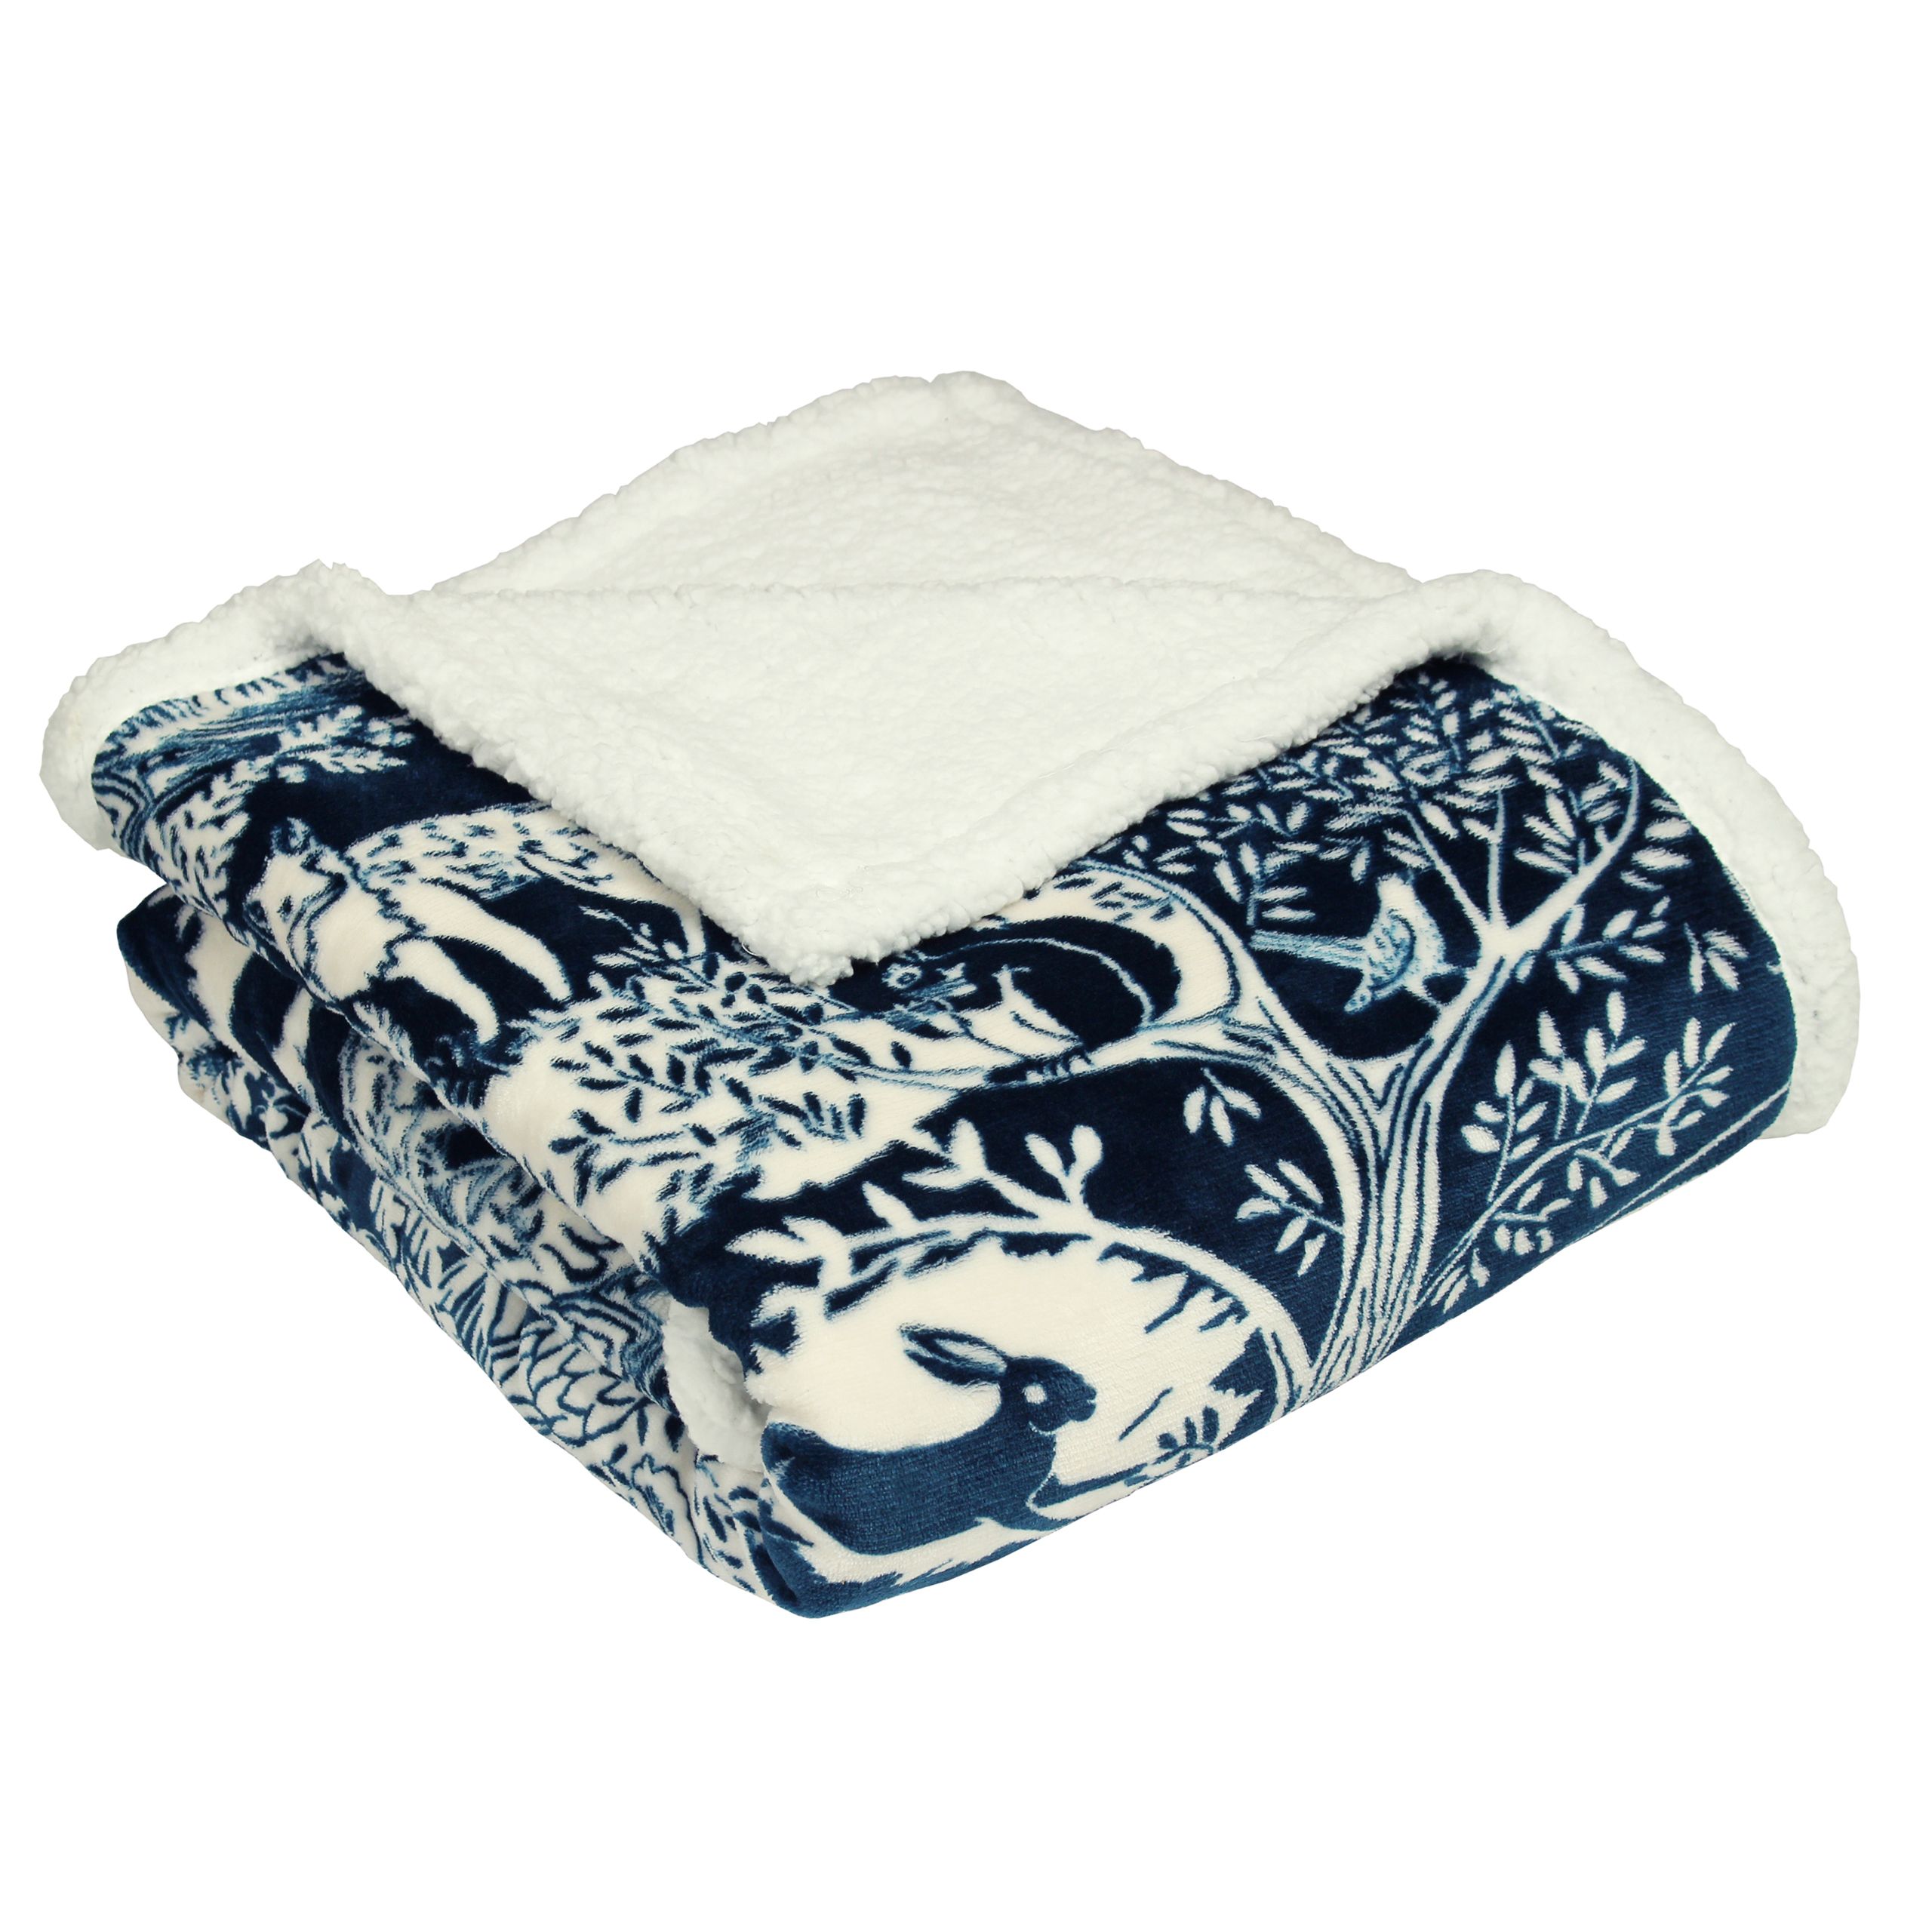 Invite nature into your home with winter woods throw. The design features a stunning woodblock inspired print with plenty of woodland animals and trees. Created with luxurious 230gsm microfleece for a super soft front that emanates an opulent sheen. With a 230gsm sherpa reverse in a optic white you'll be keeping toasty warm all night long.